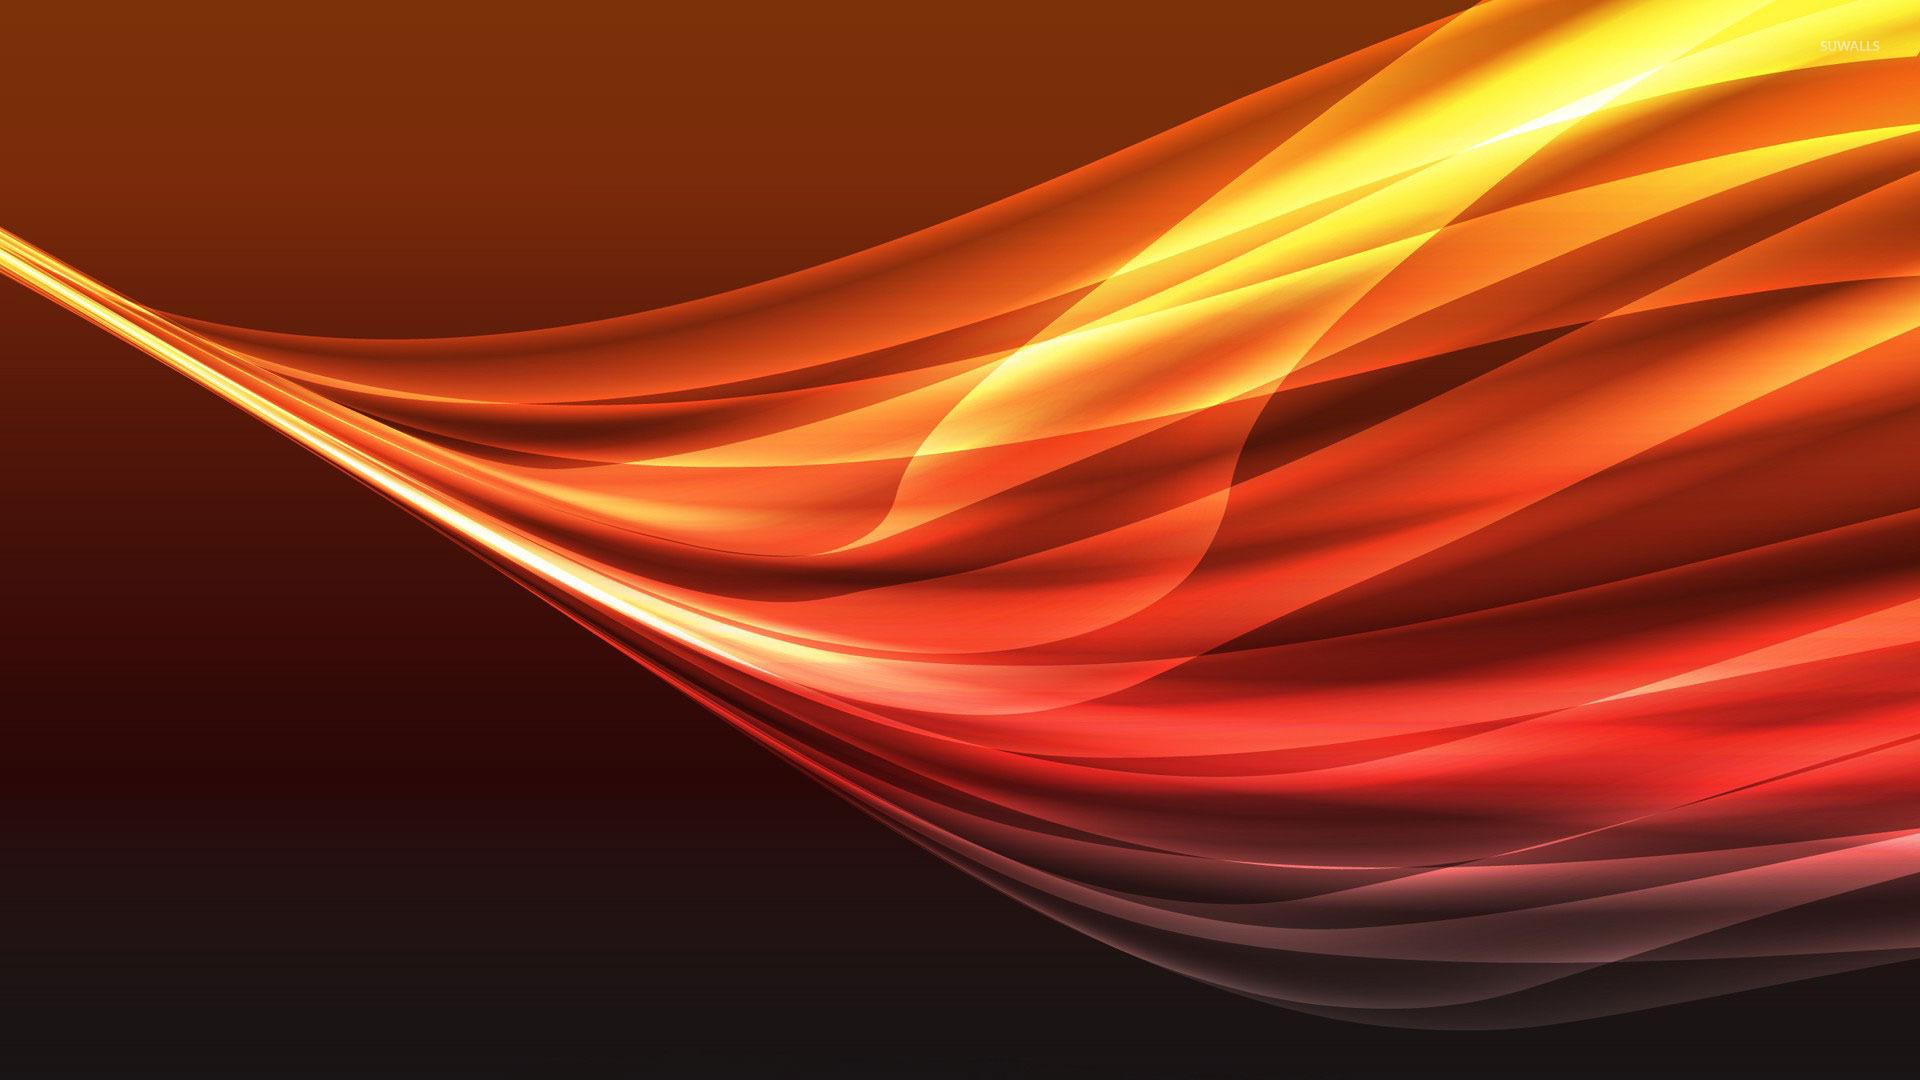 Stylish Orange and Black Gradient Background Design Ideas for Your ...